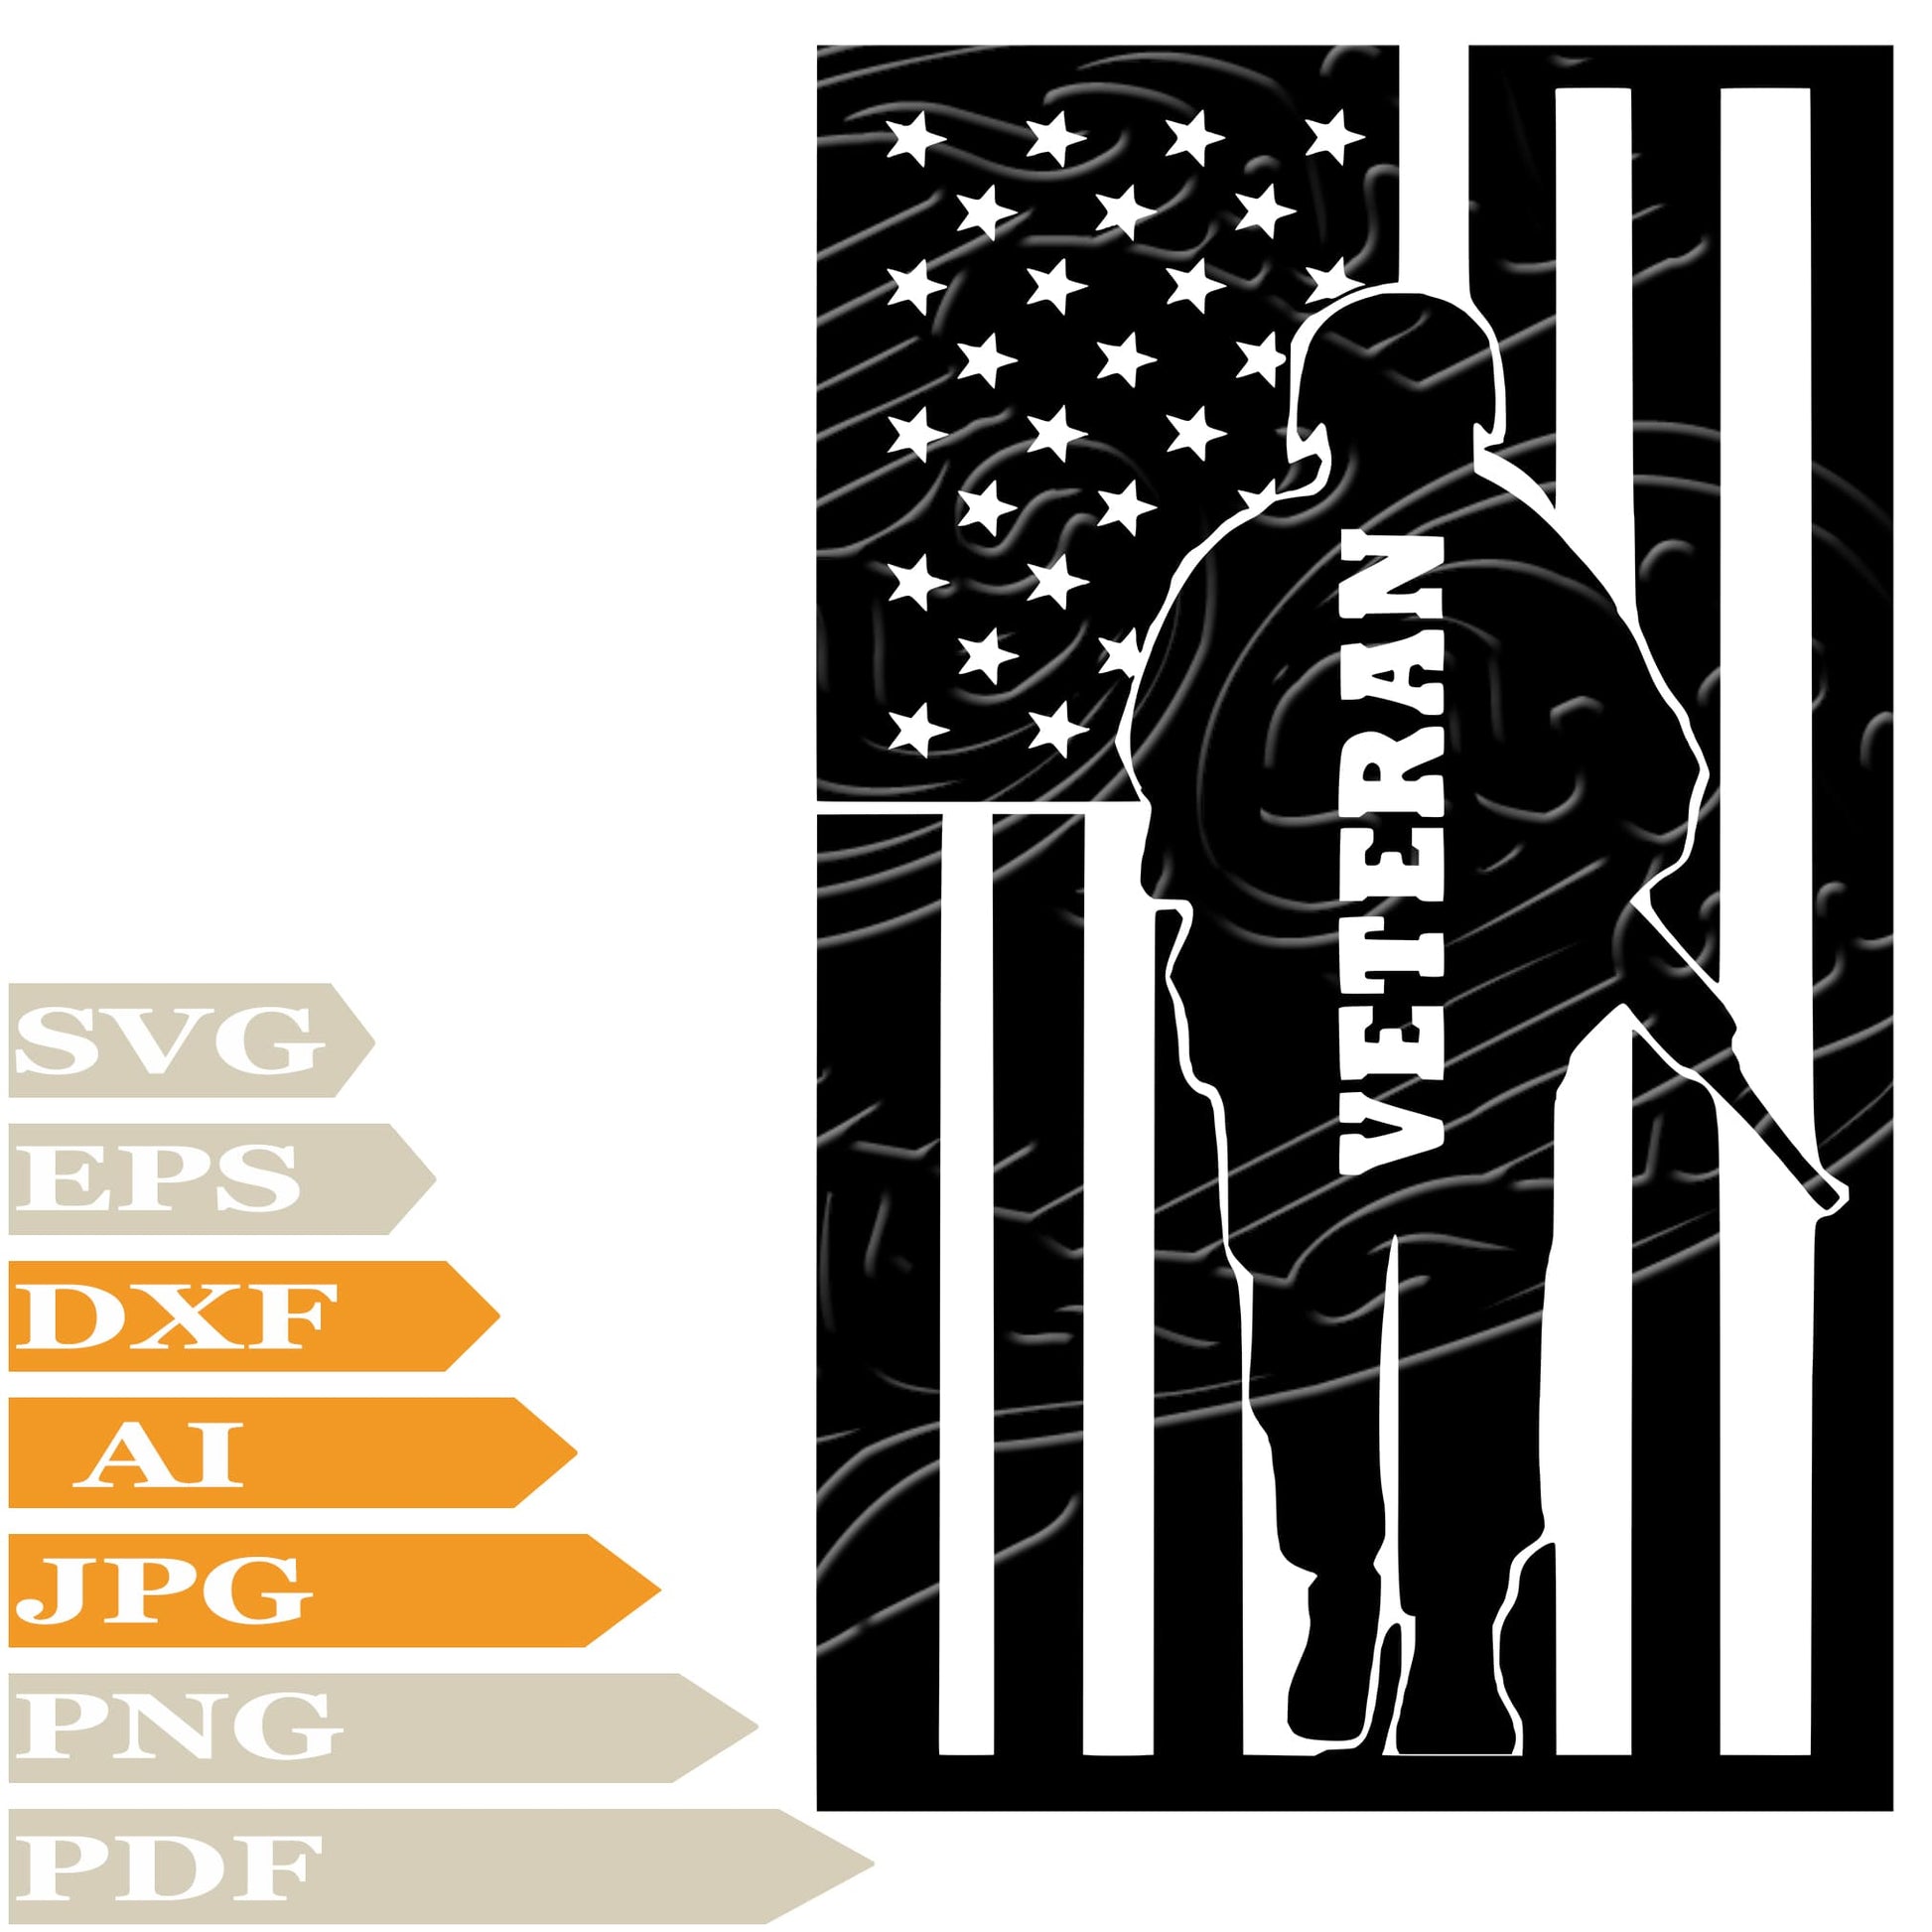 Show Your Patriotism With This Soldier Svg File Bundle, Including American Soldier Svg Design, Soldier With Flag Png, Soldier War Hero Vector Graphics, Soldier With Flag Svg For Tattoo, And American Soldier Svg For Cricut. Perfect For Use In Graphic Design Projects, DIY Crafts, Patriotic Tattoos, And More.